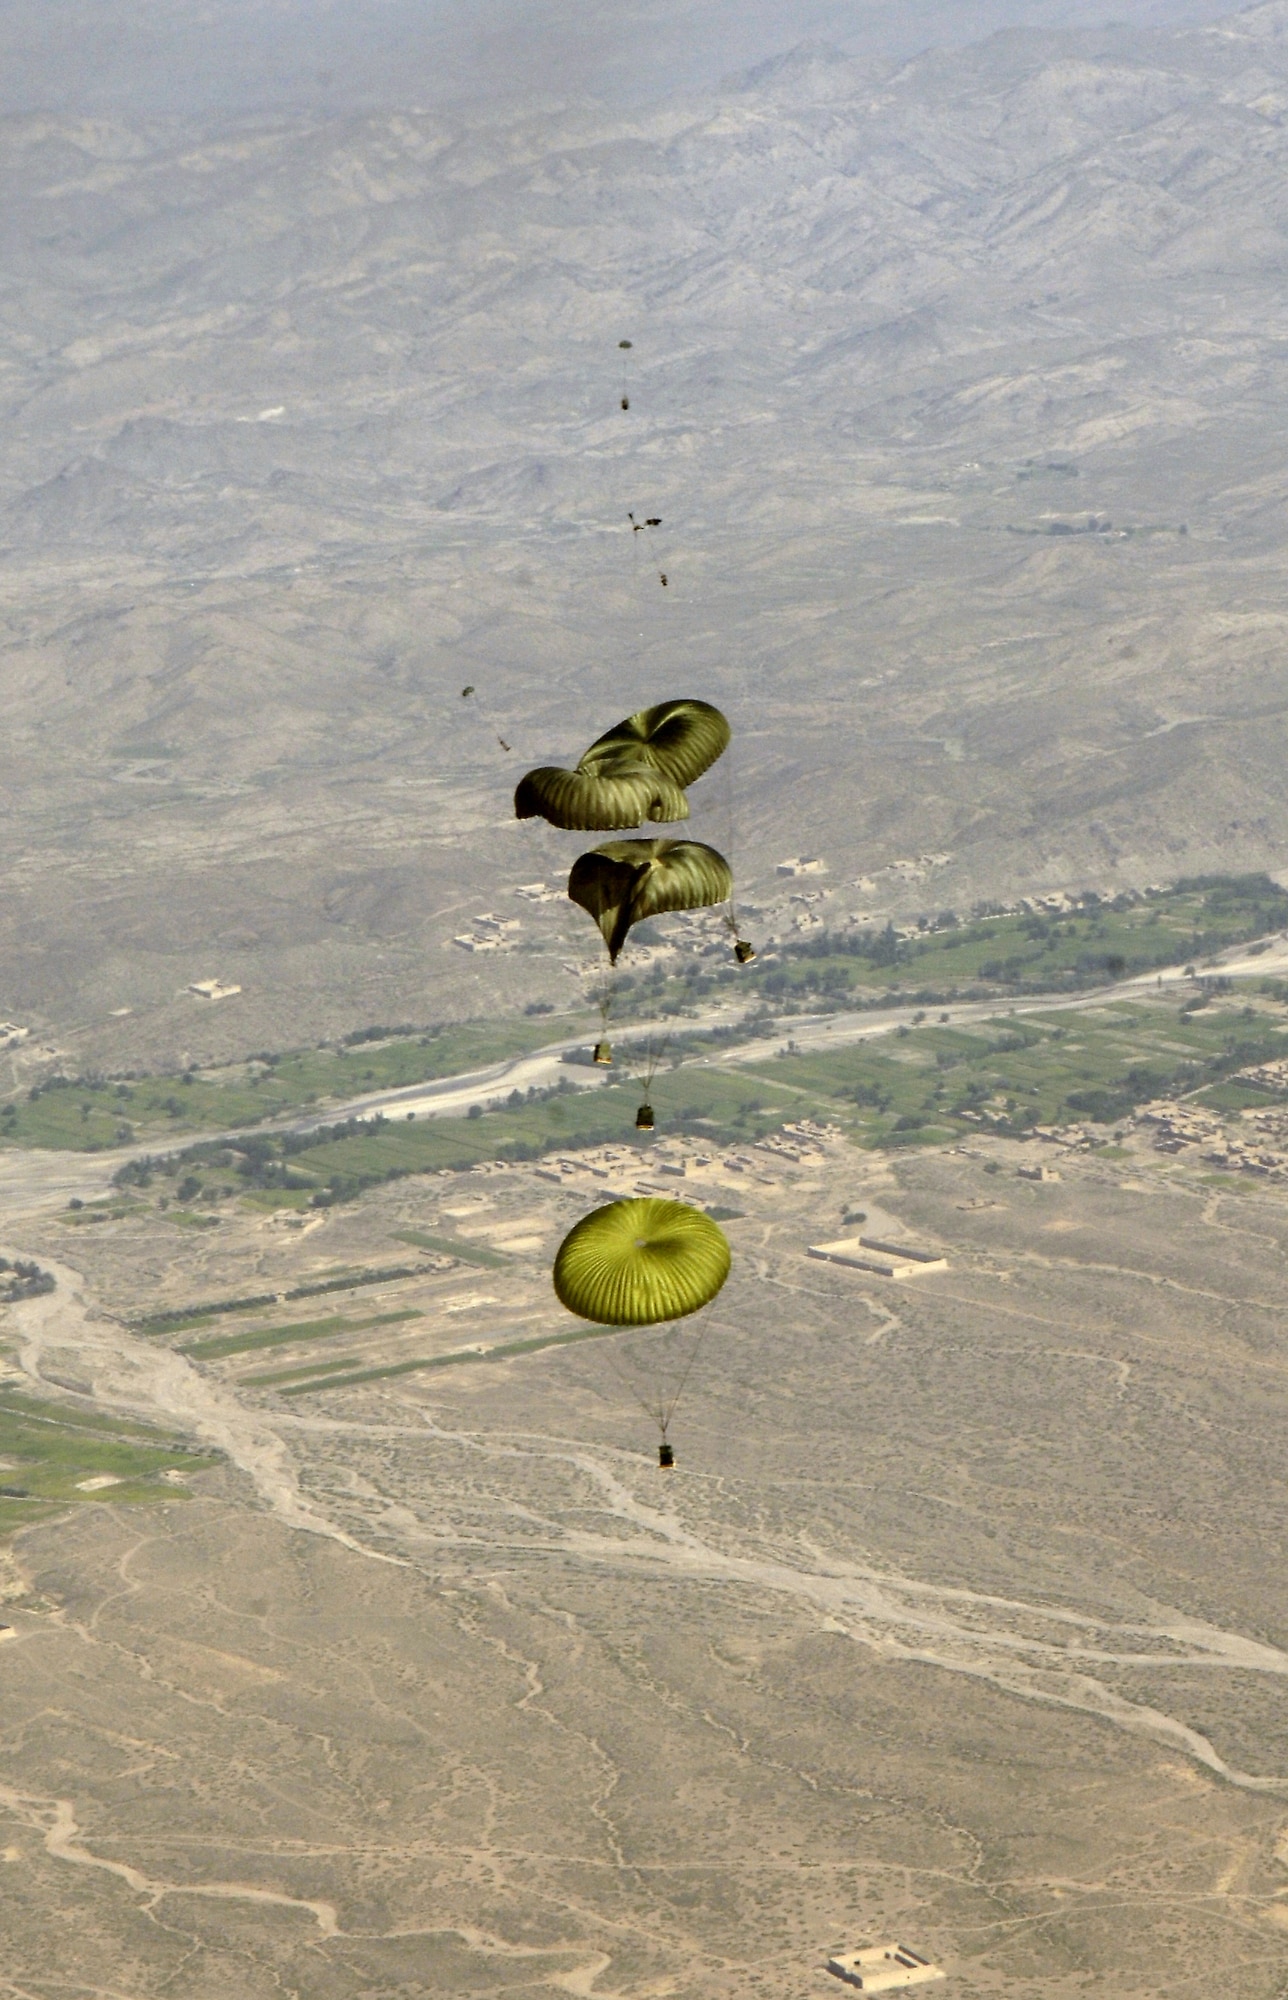 Joint Precision Air Drop System bundles float to the ground after being dropped from a C-130 Hercules Aug. 26. The drop was made from almost 10,000 feet above sea level and was calculated using up-to-the-minute wind data relayed from two small dropsondes deployed 20 minutes earlier. The dropsondes calculate wind speed and relay the information back to the aircraft, helping to calculate the correct drop point. (U.S. Air Force photo/Senior Airman Brian Ferguson) 